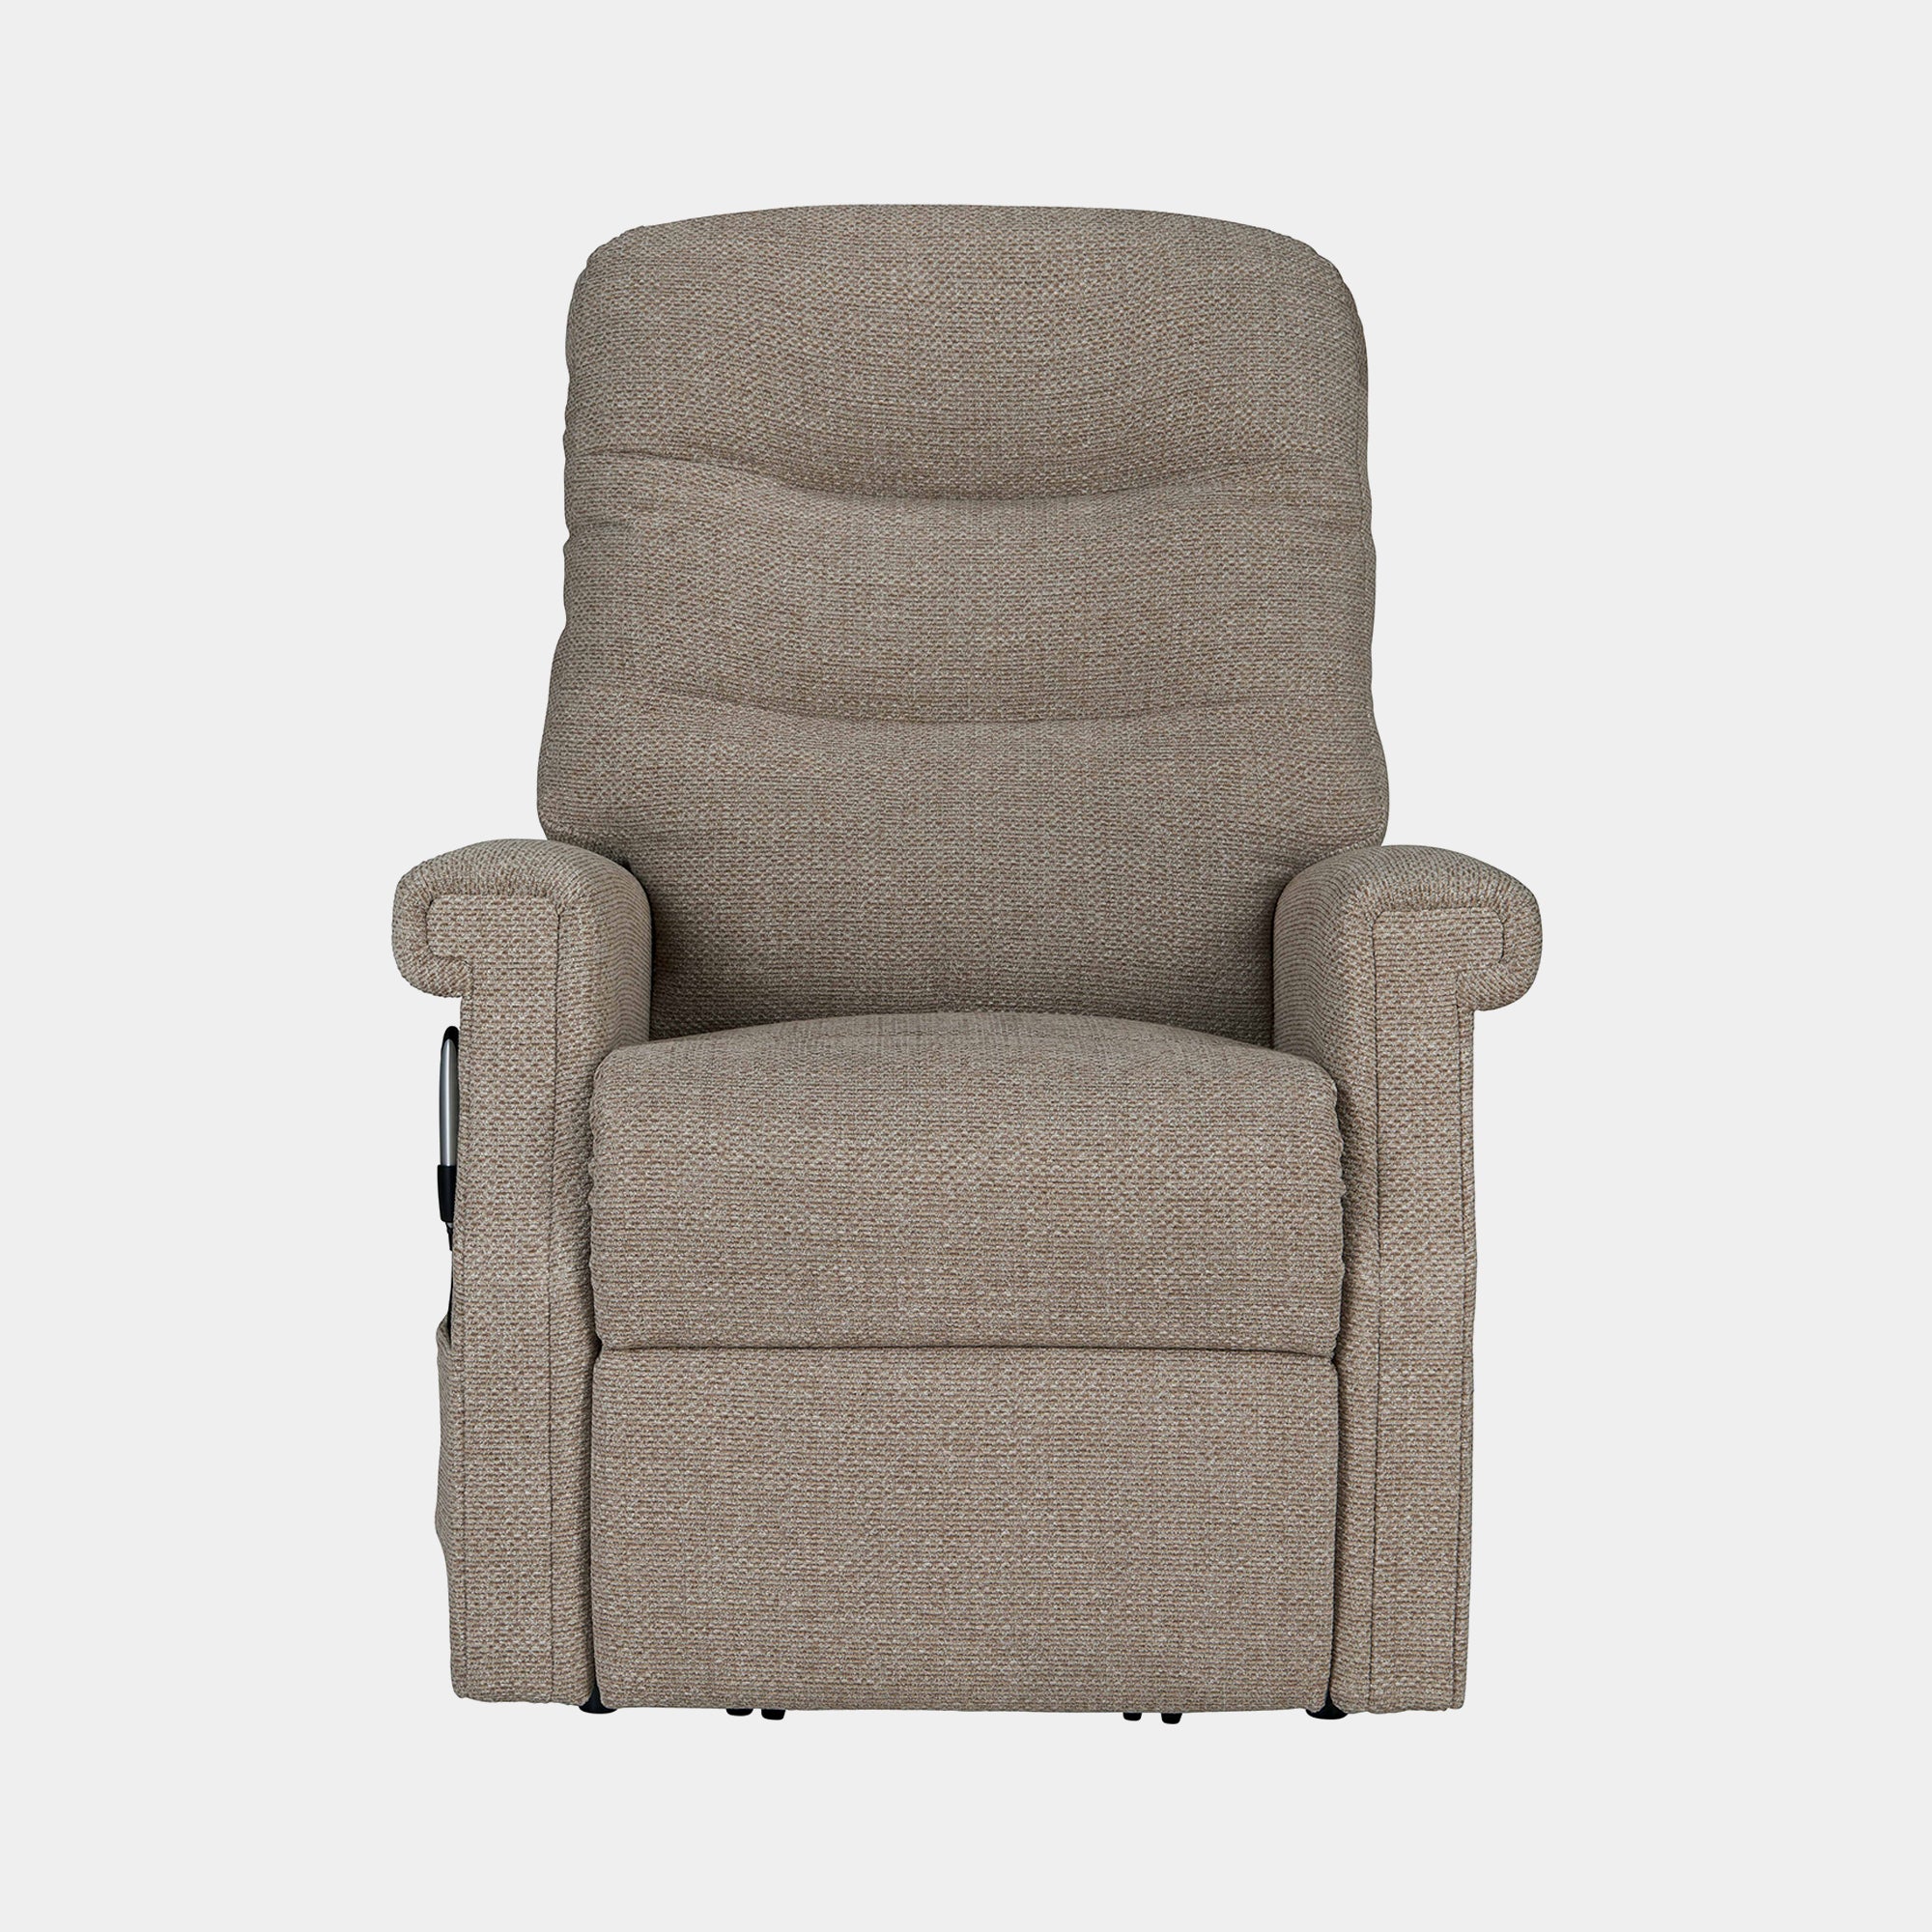 Lansdowne - Fixed Standard Chair In Fabric